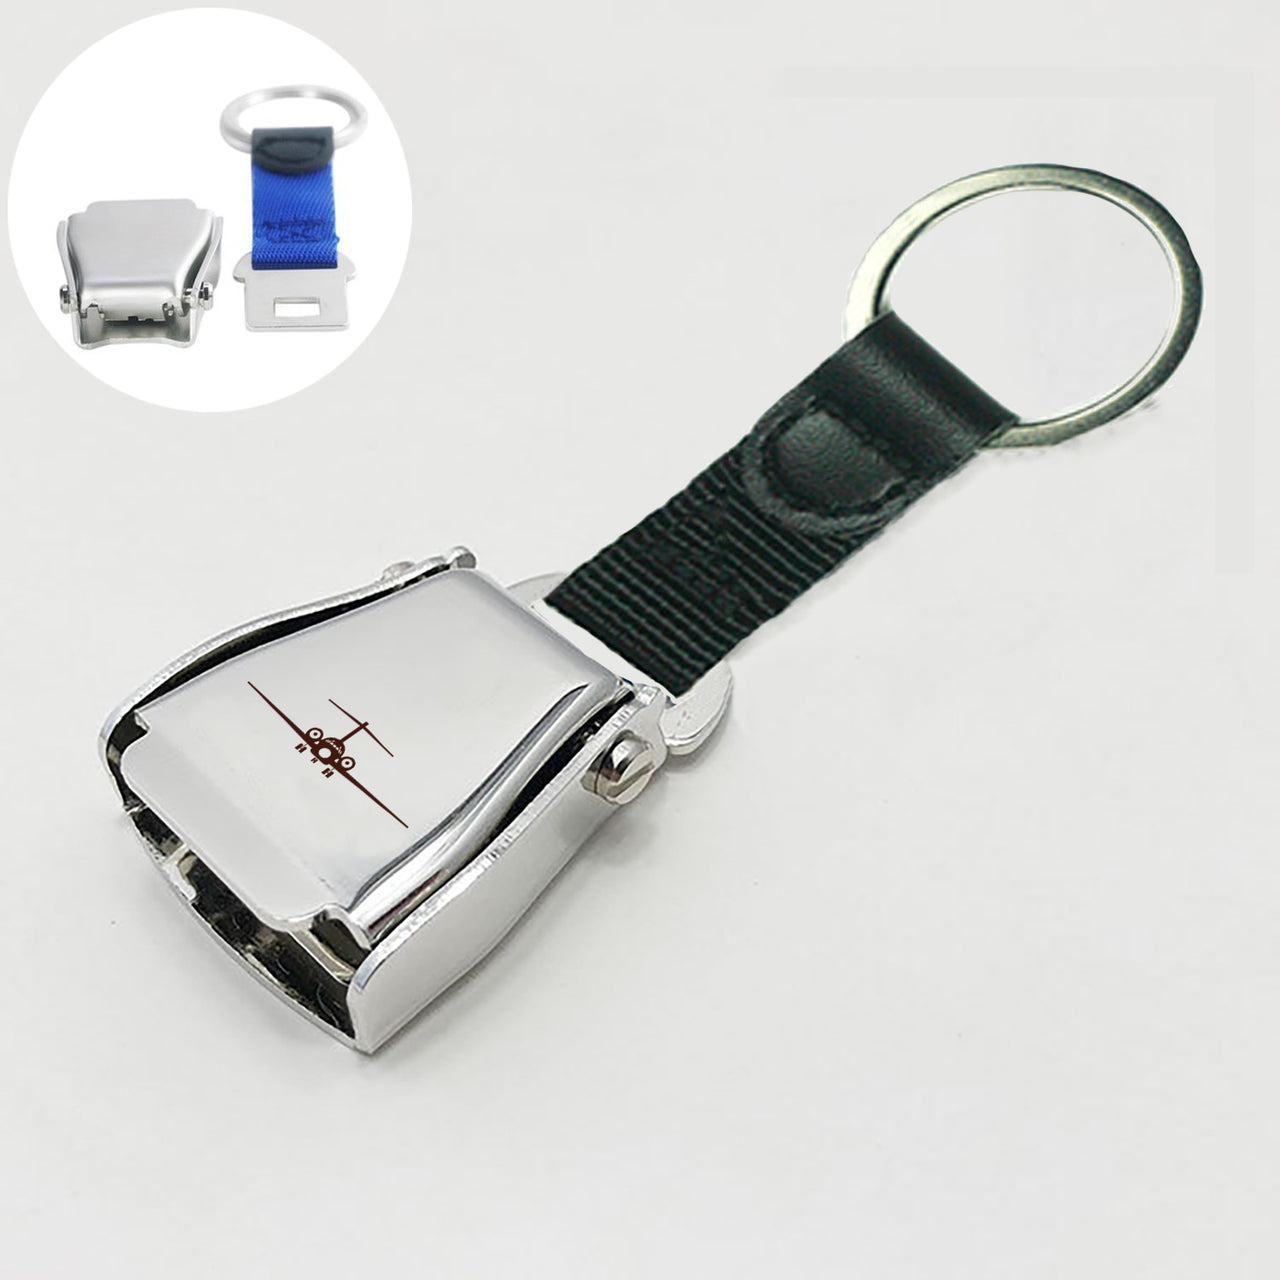 Boeing 717 Silhouette Silhouette Designed Airplane Seat Belt Key Chains